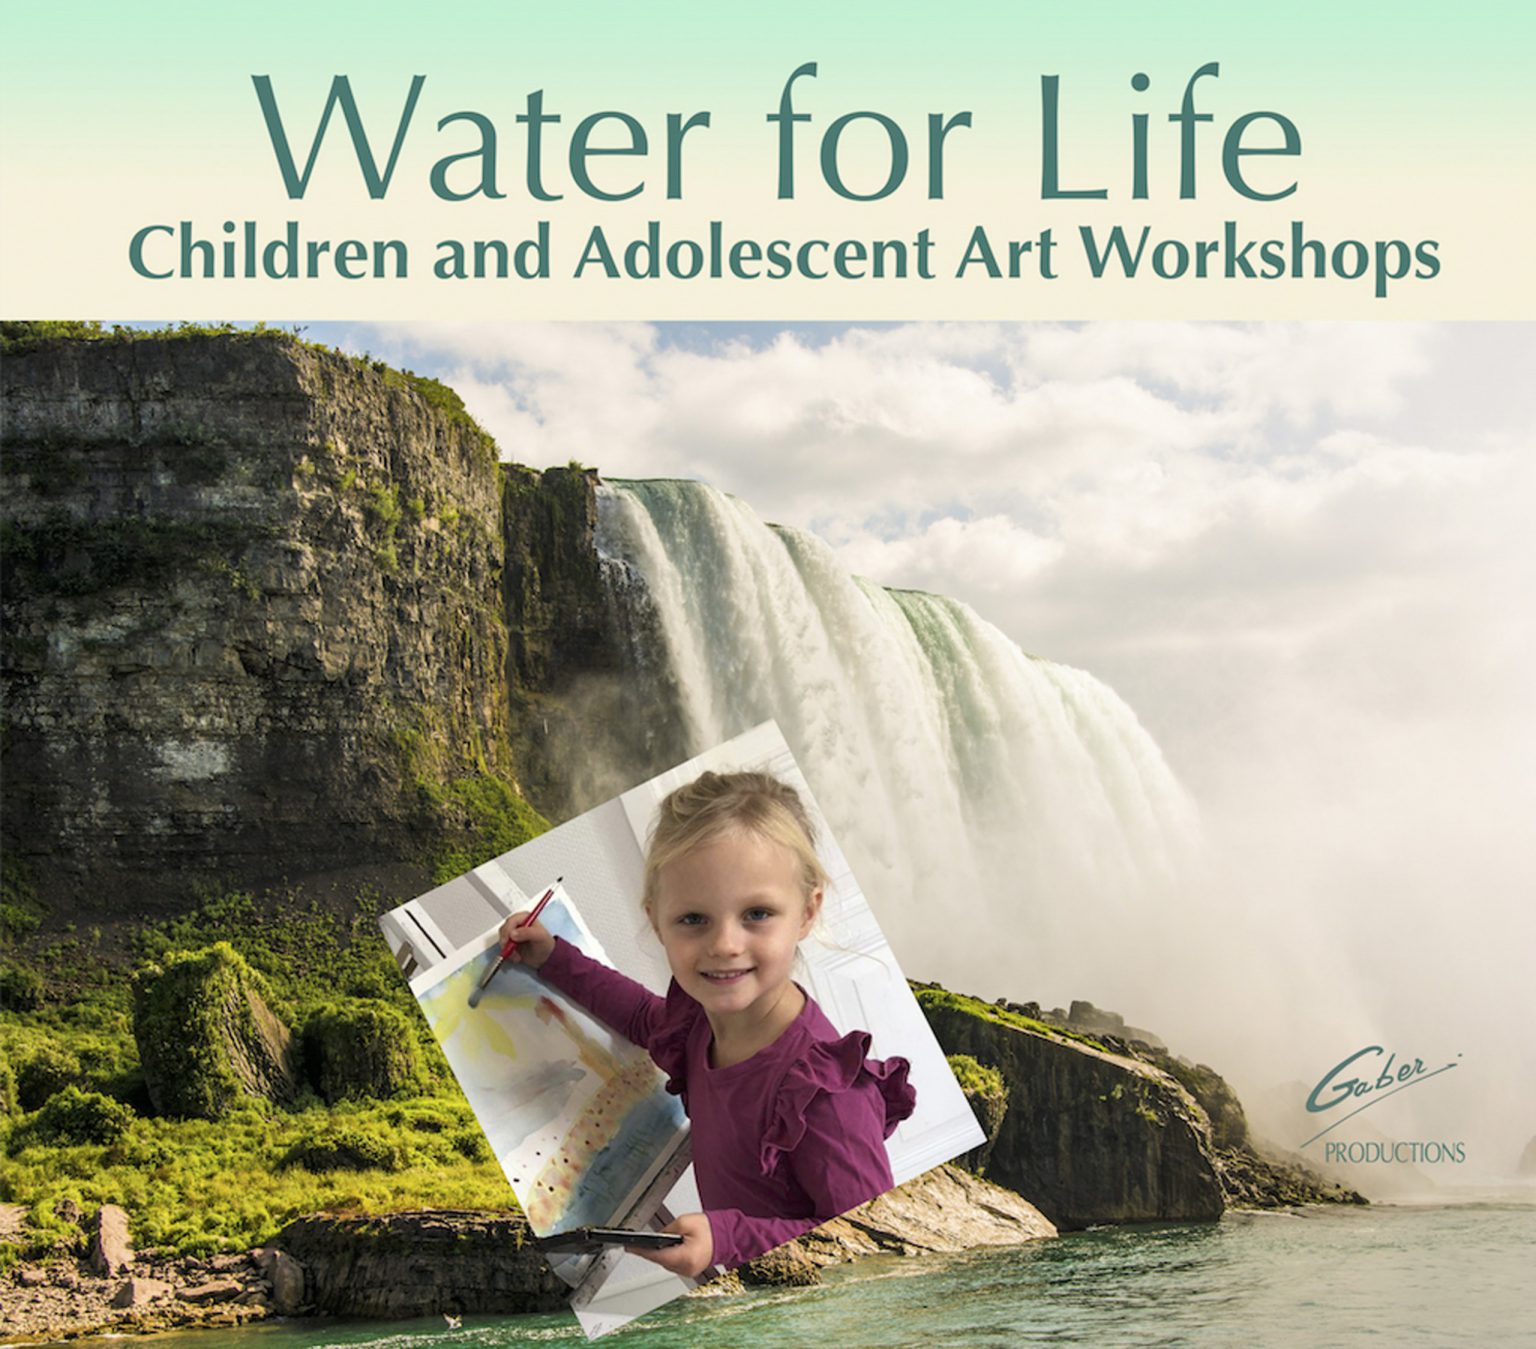 Water for Life, Children and Adolescent Art Workshops, Niagara Falls, Ontario Canada